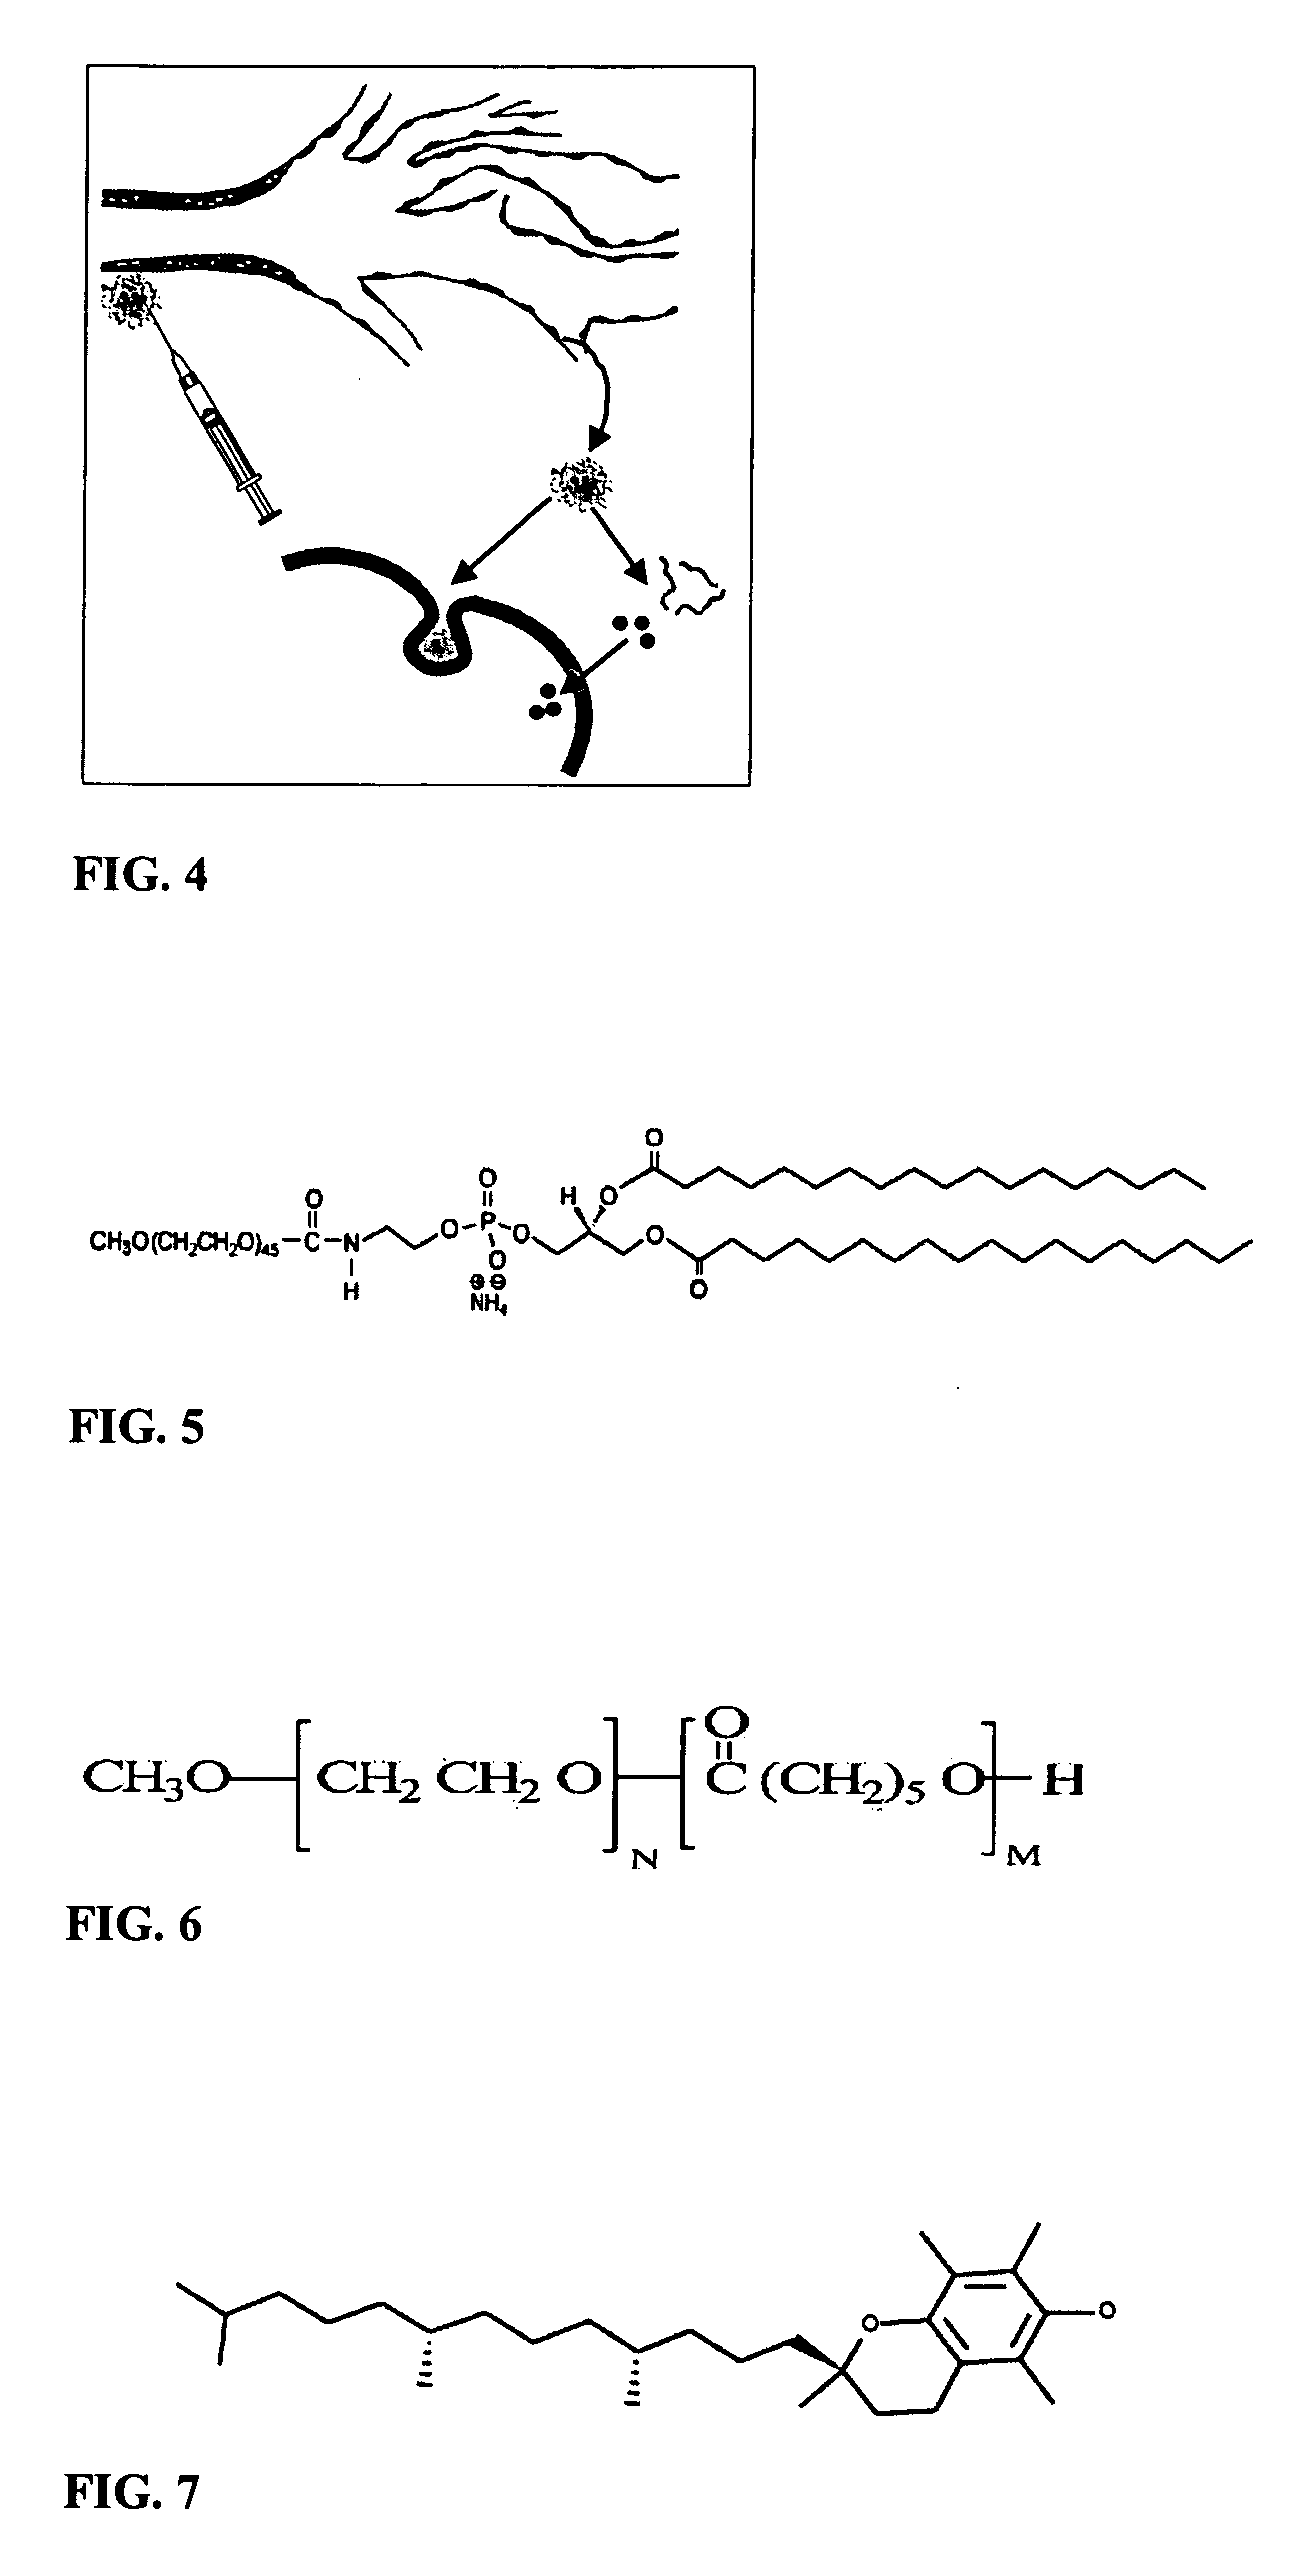 Micelle composition of polymer and passenger drug